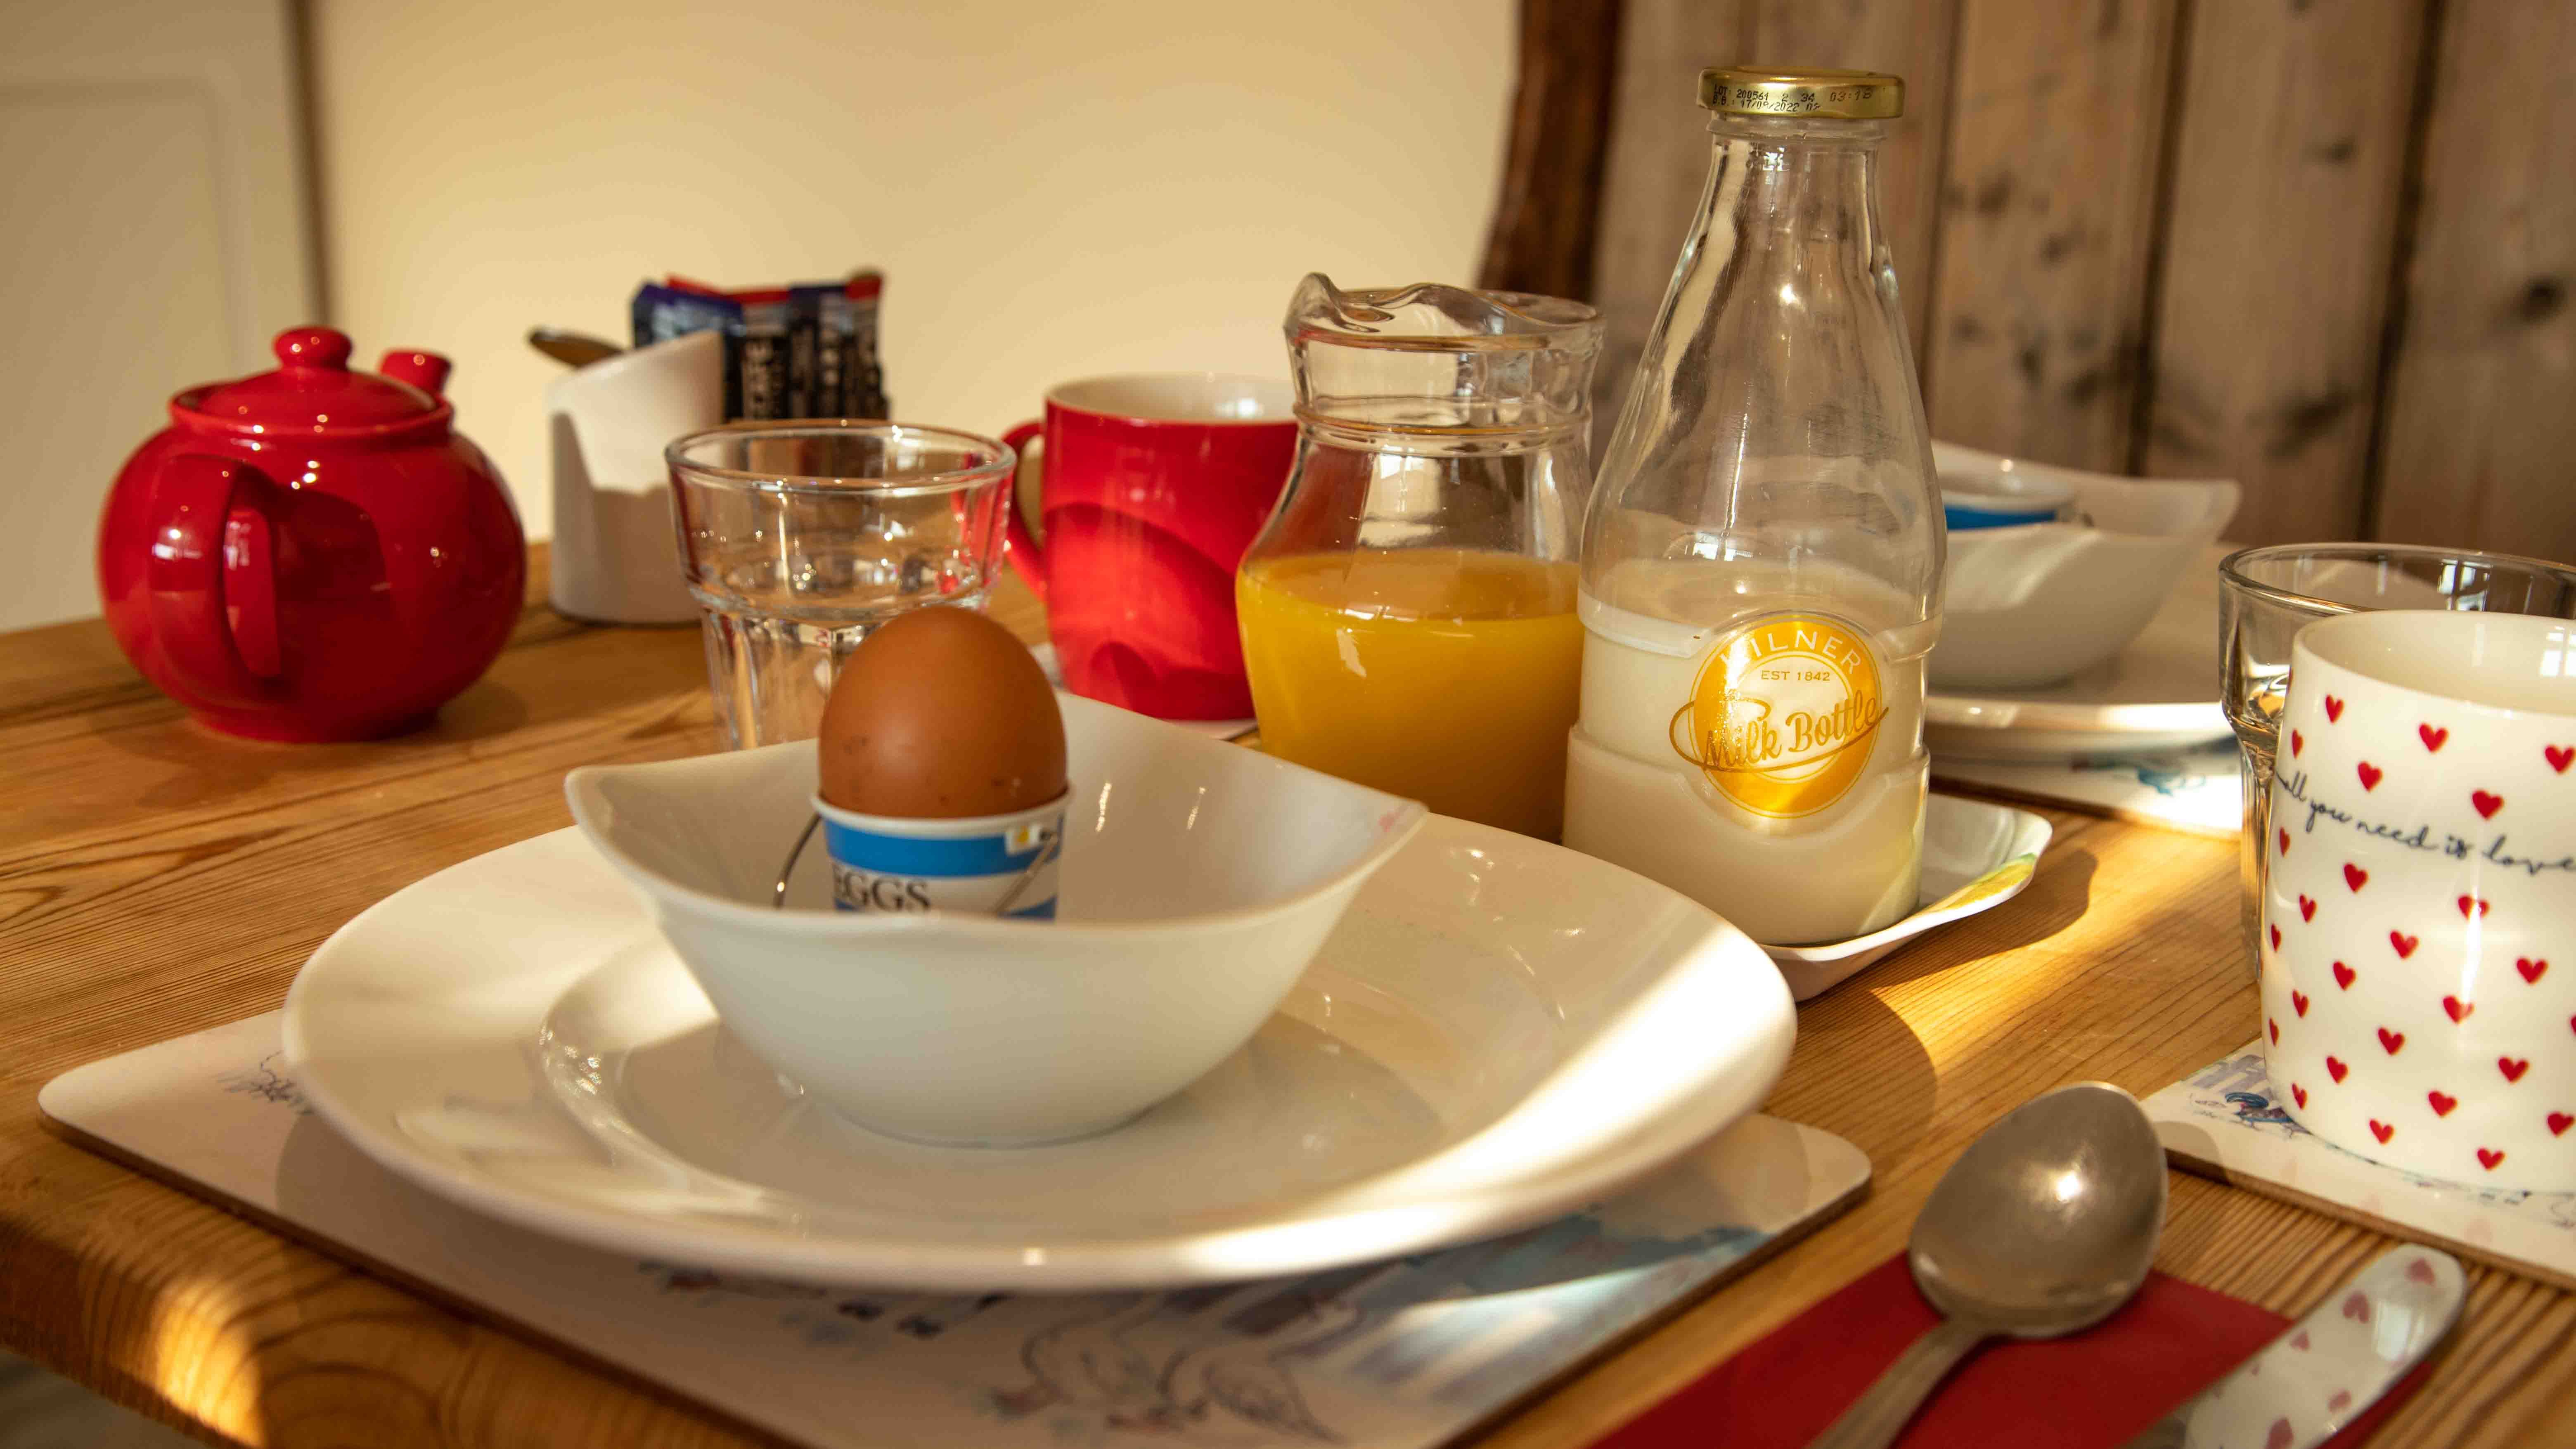 a table set with cutlery, crockery, milk, juice, eggs, and other breakfast items